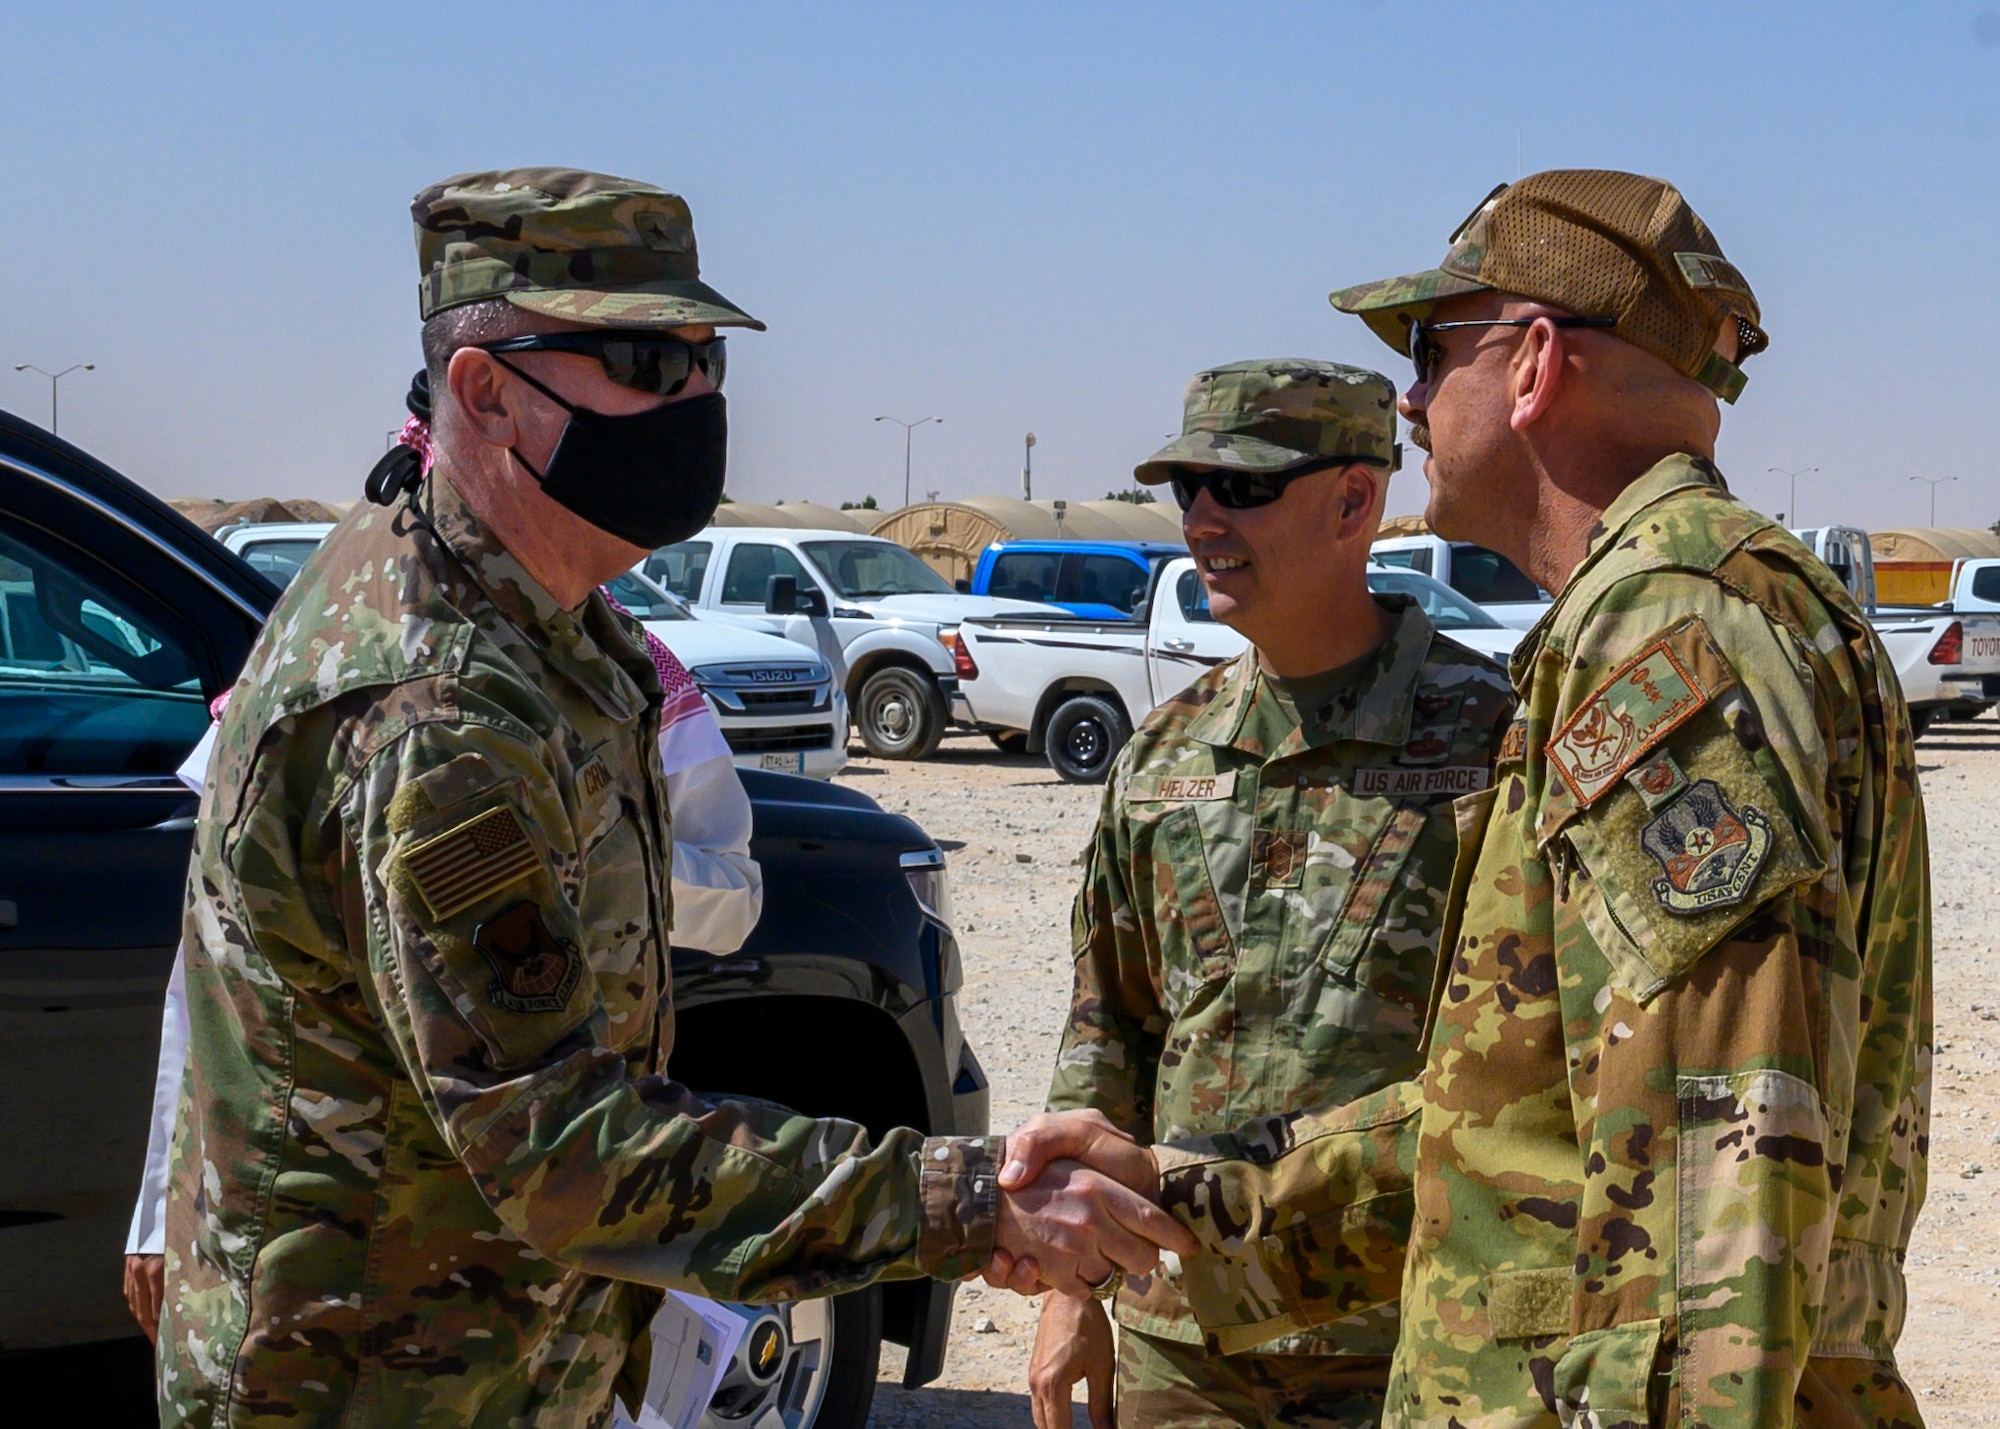 U.S. Air Force Col. Kevin Davidson, 378th Air Expeditionary Wing vice commander, greets U.S. Air Force Brig. Gen. Thomas Crimmins, Senior Defense Official and Defense Attaché at the Embassy of the United States, Kingdom of Saudi Arabia, at Prince Sultan Air Base, KSA, Oct. 12, 2021. Crimmins visited PSAB for the first time since assuming the SDO role in September, meeting with various personnel to learn about defense efforts and expanding capabilities on base. (U.S. Air Force photo by Senior Airman Samuel Earick)